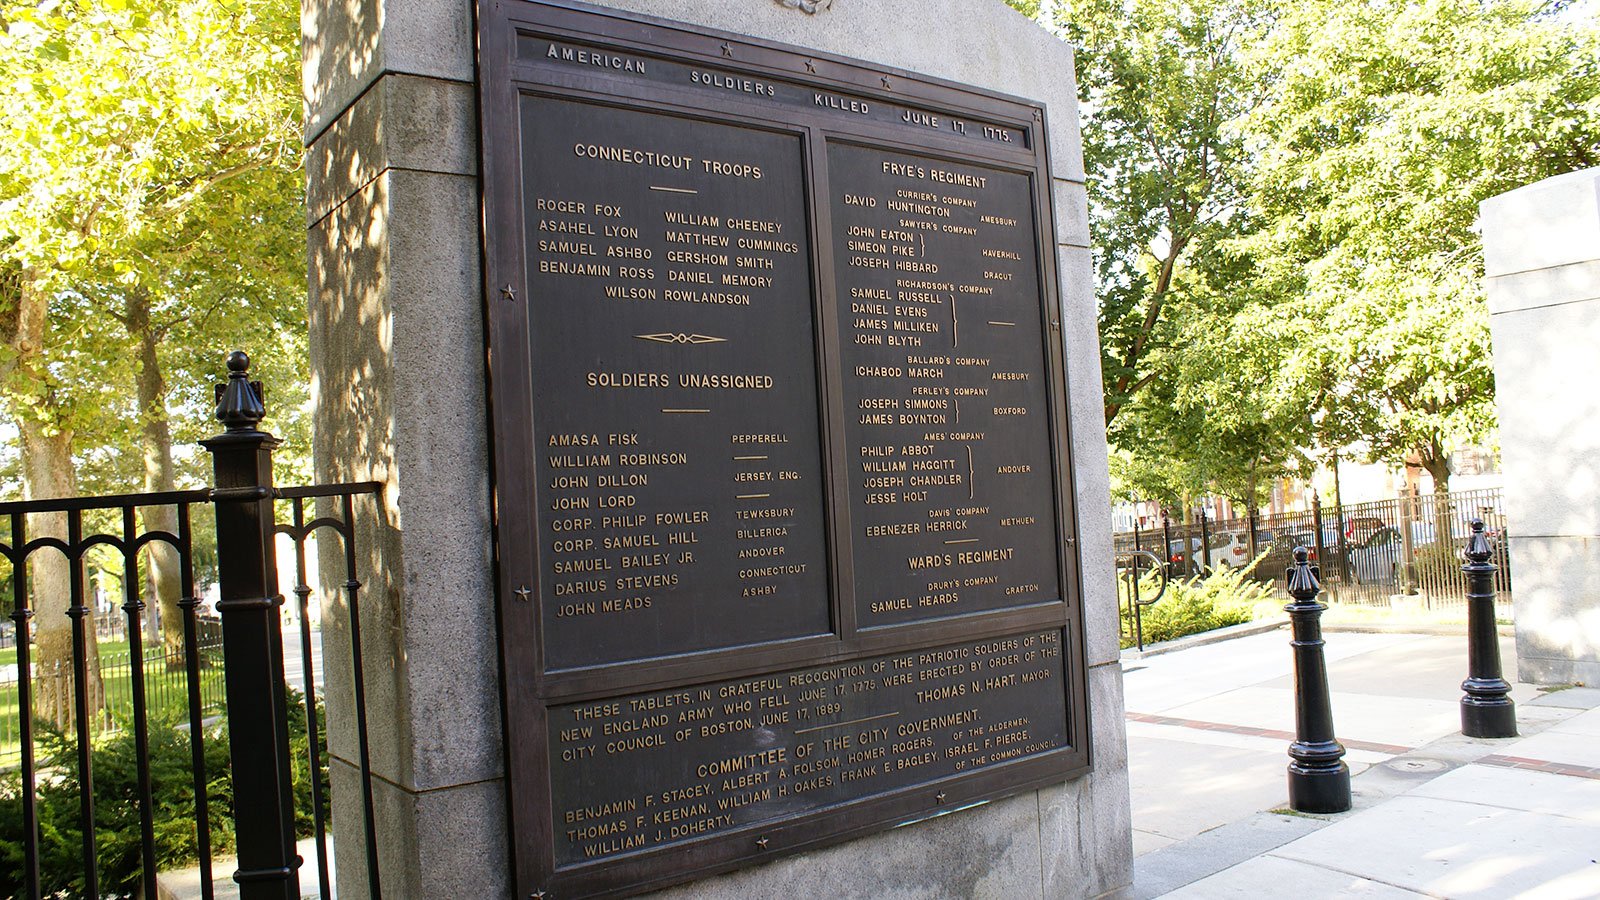 Plaque near the Massachusetts gate, outside the Bunker Hill Monument, commemorates the Revolutionary soldiers killed at the Battle of Bunker Hill